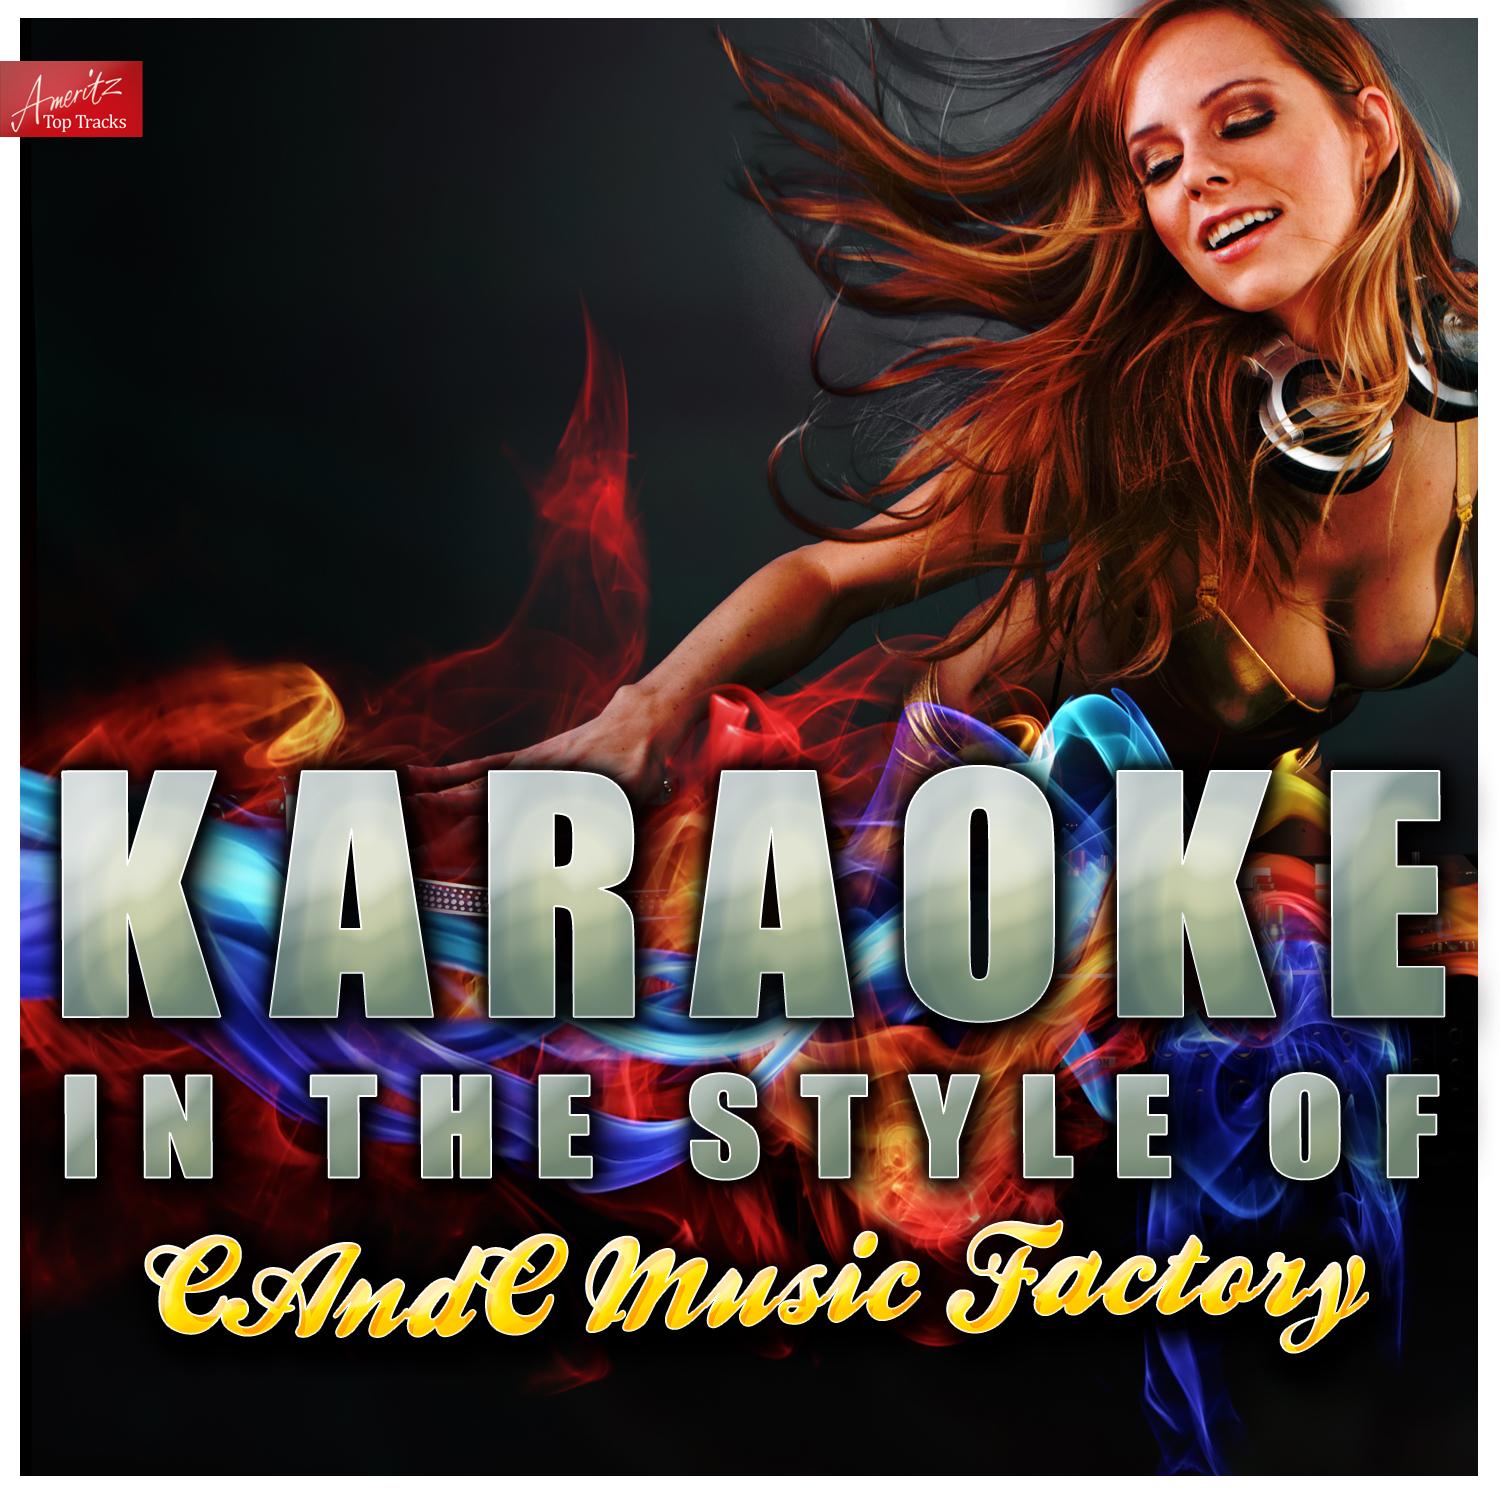 Karaoke - In the Style of Candc Music Factory